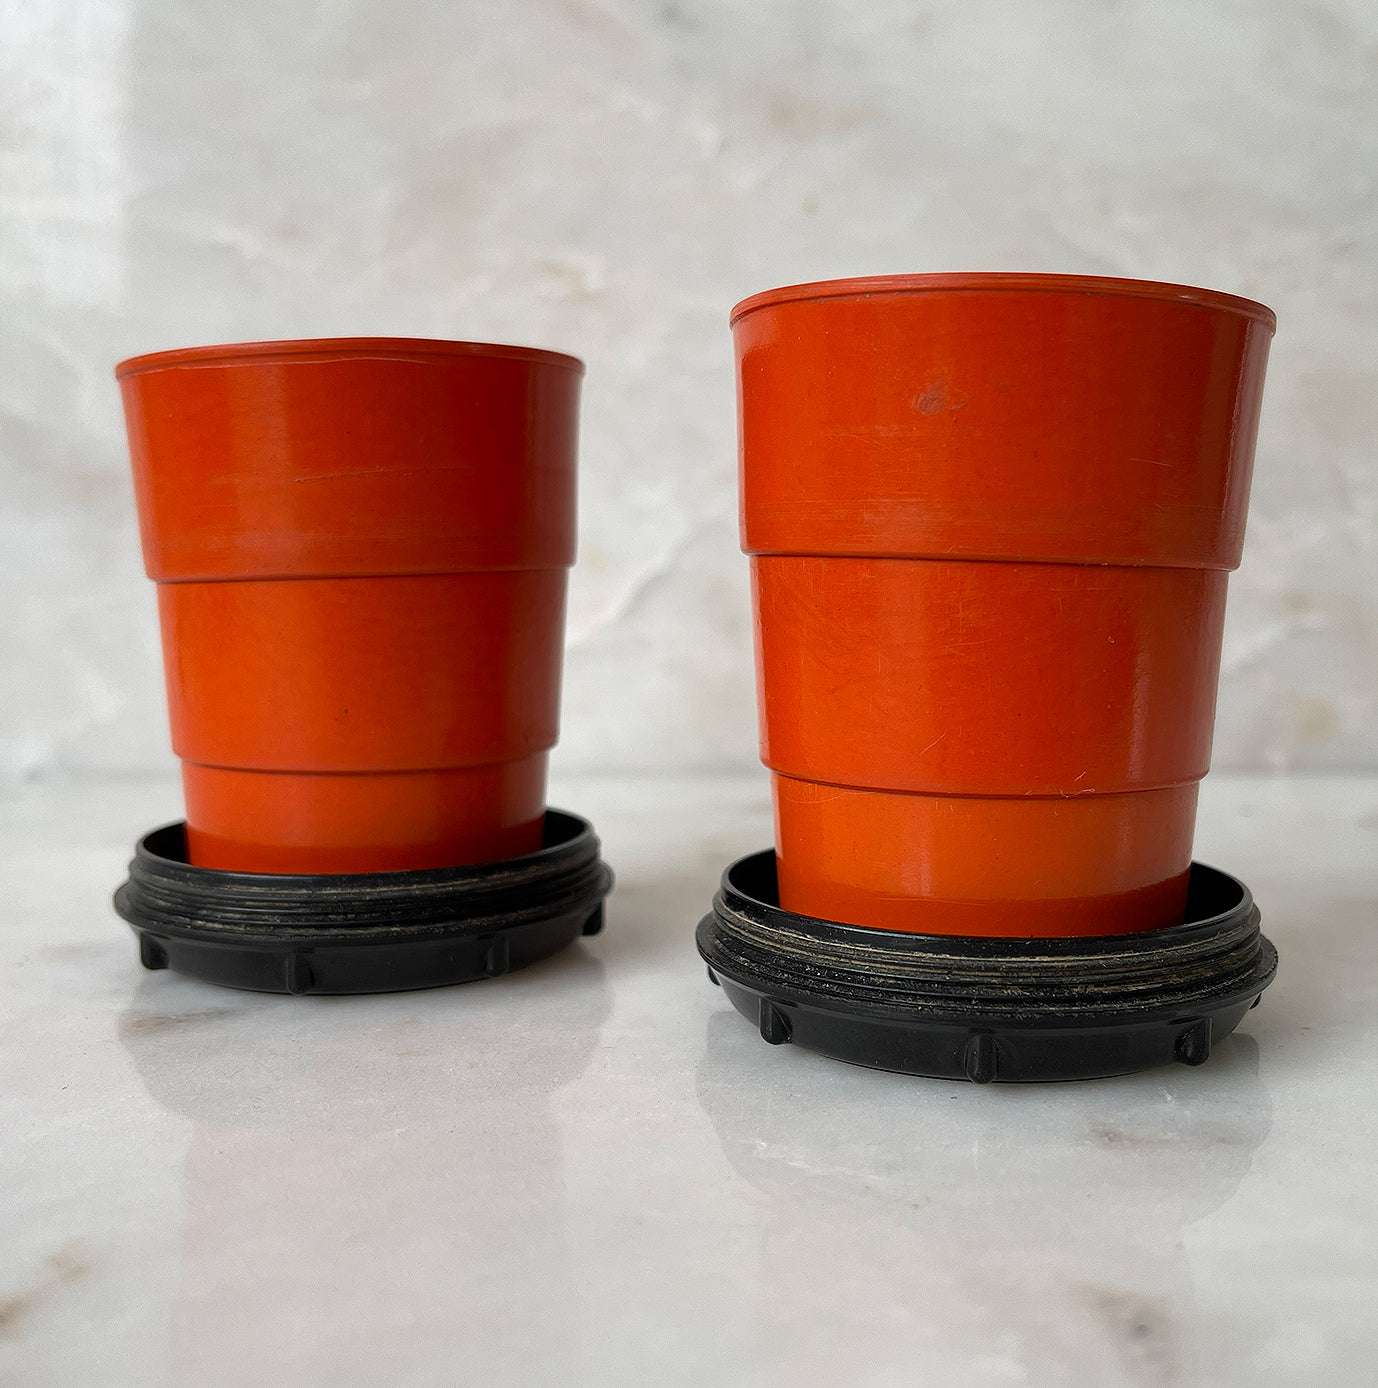 A pair of Art Deco Bakelite Telescopic Cups in a popping orange colour with black base. Unscrew the lid and pull up the rim inside to create a water tight cup! The perfect size to keep in your pocket for a little tipple if you are out and about - SHOP NOW - www.intovintage.co.uk